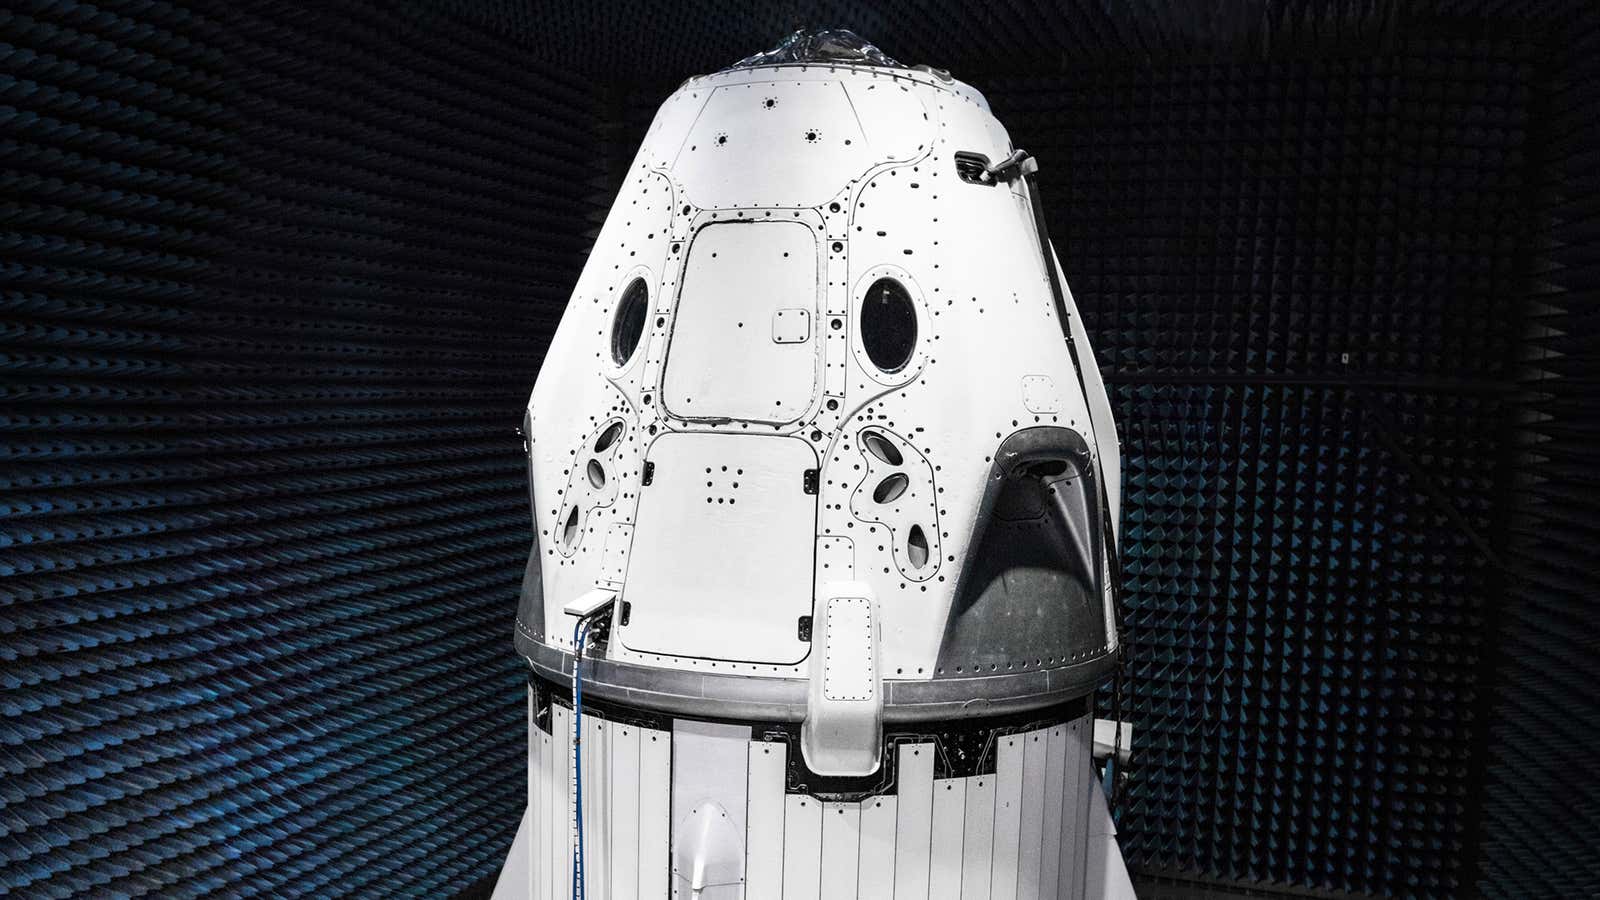 The SpaceX Dragon 2 is designed to carry seven astronauts to the International Space Station.